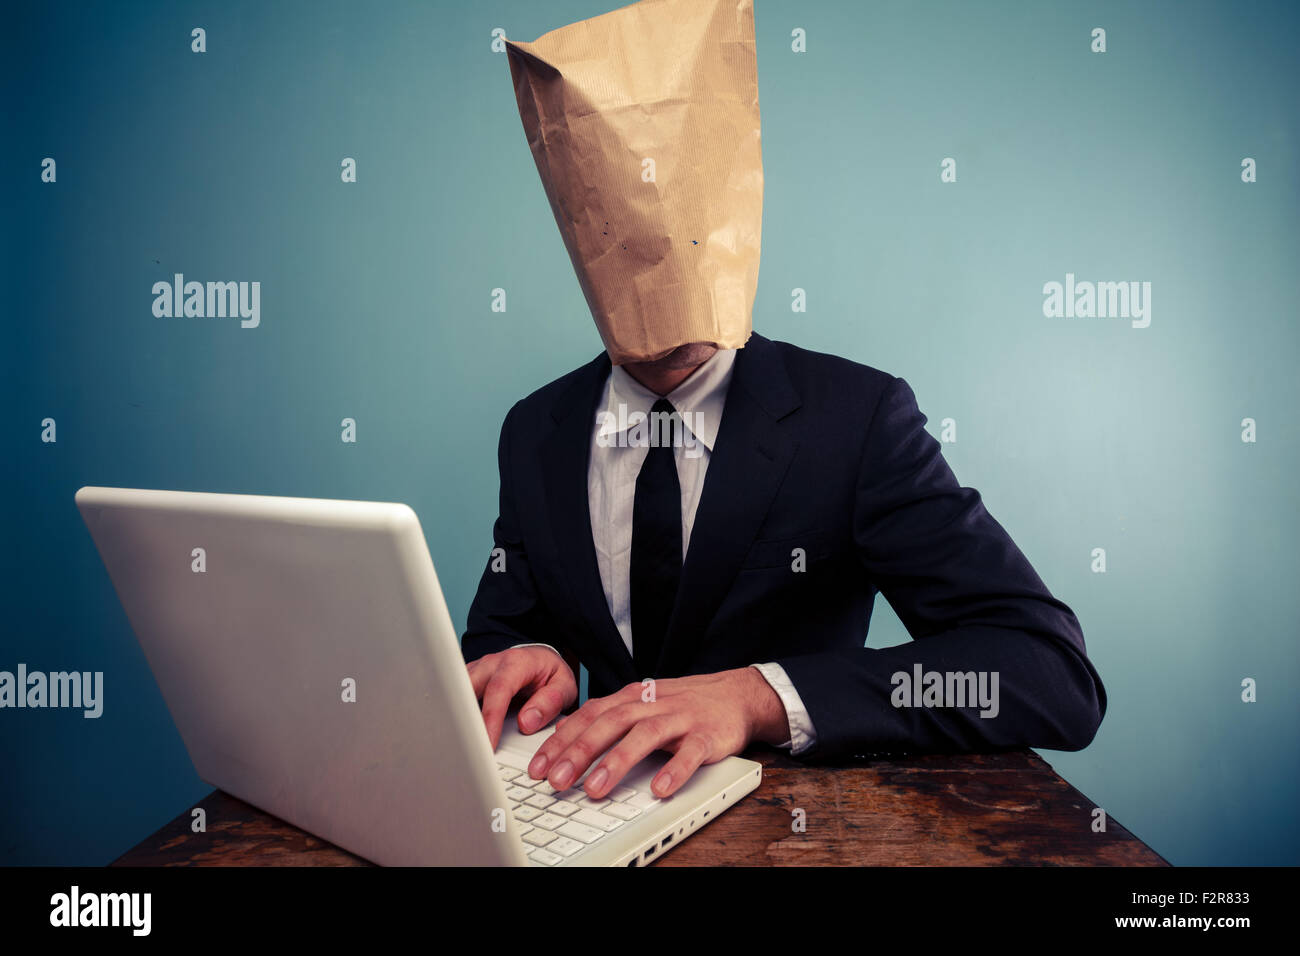 Businessman with paper bag over his head using laptop Stock Photo